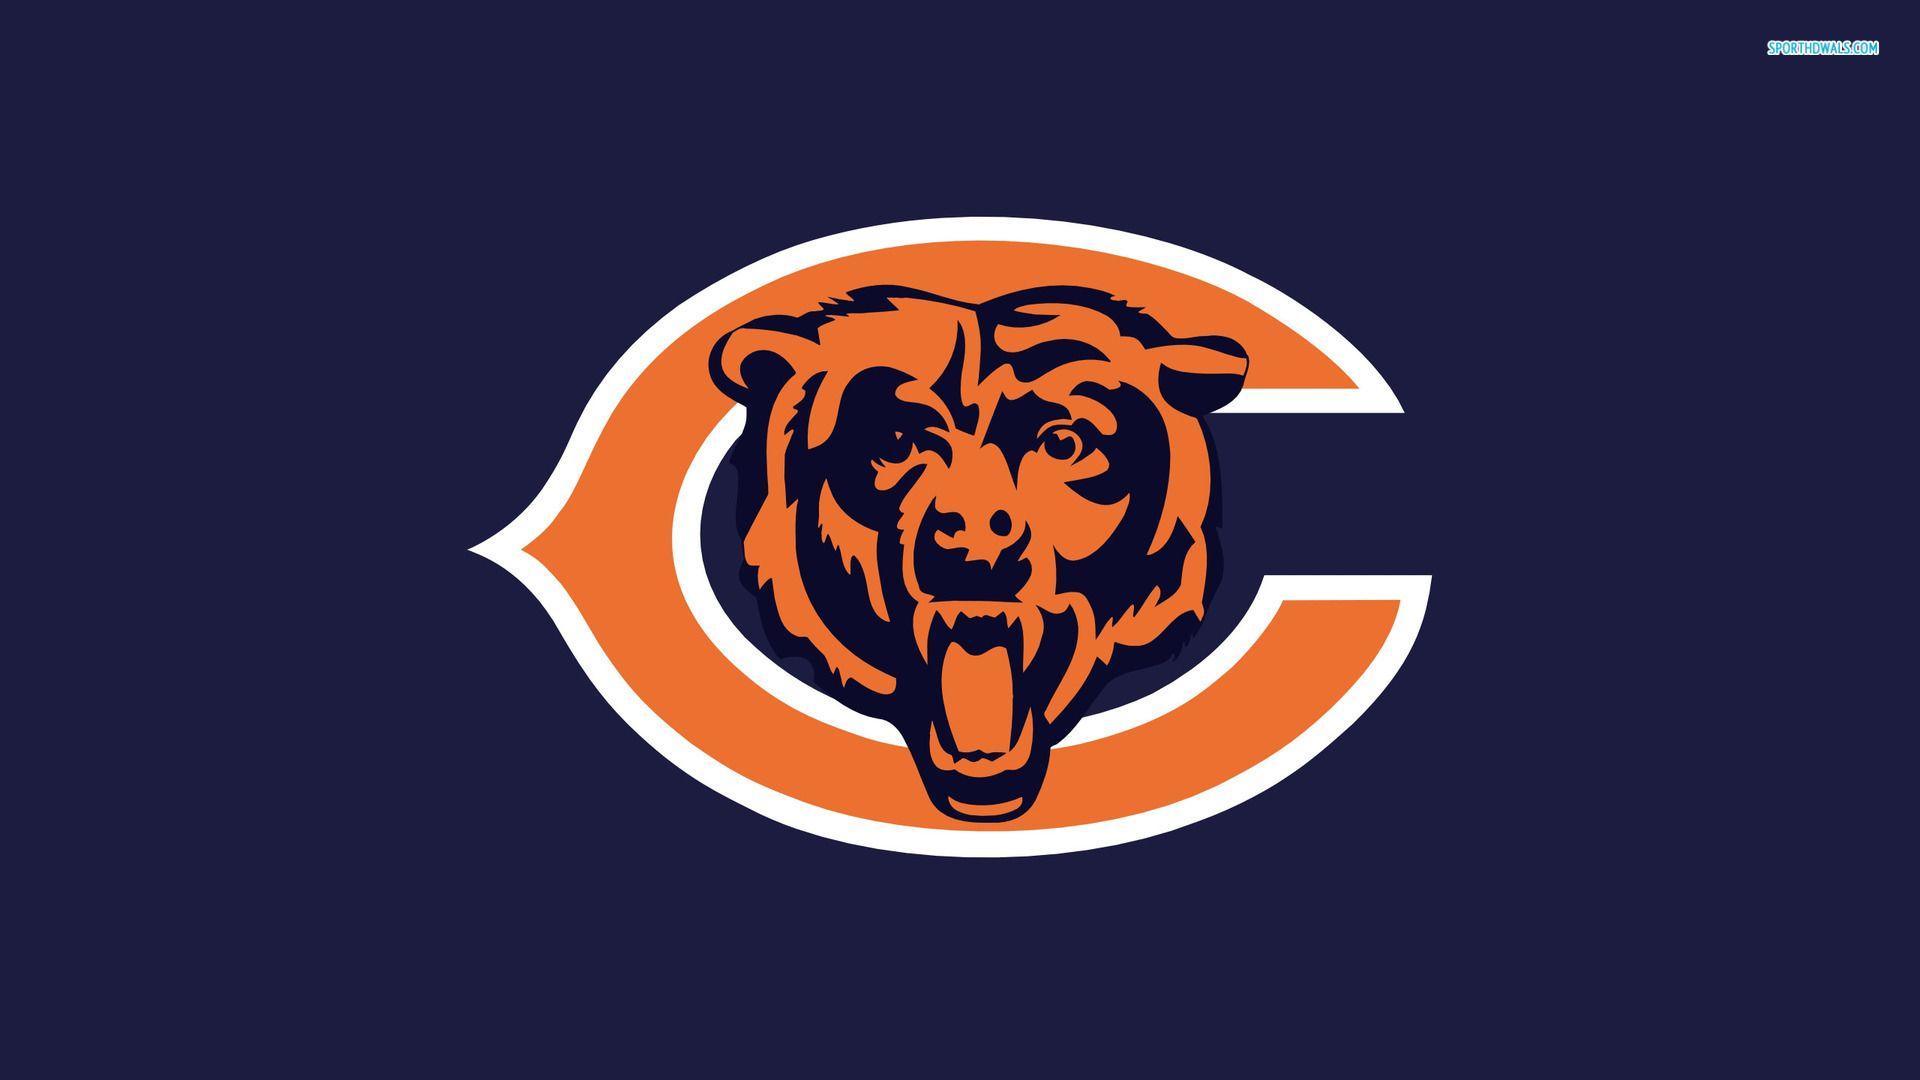 Chicago Bears Wallpapers 2015 1920x1080